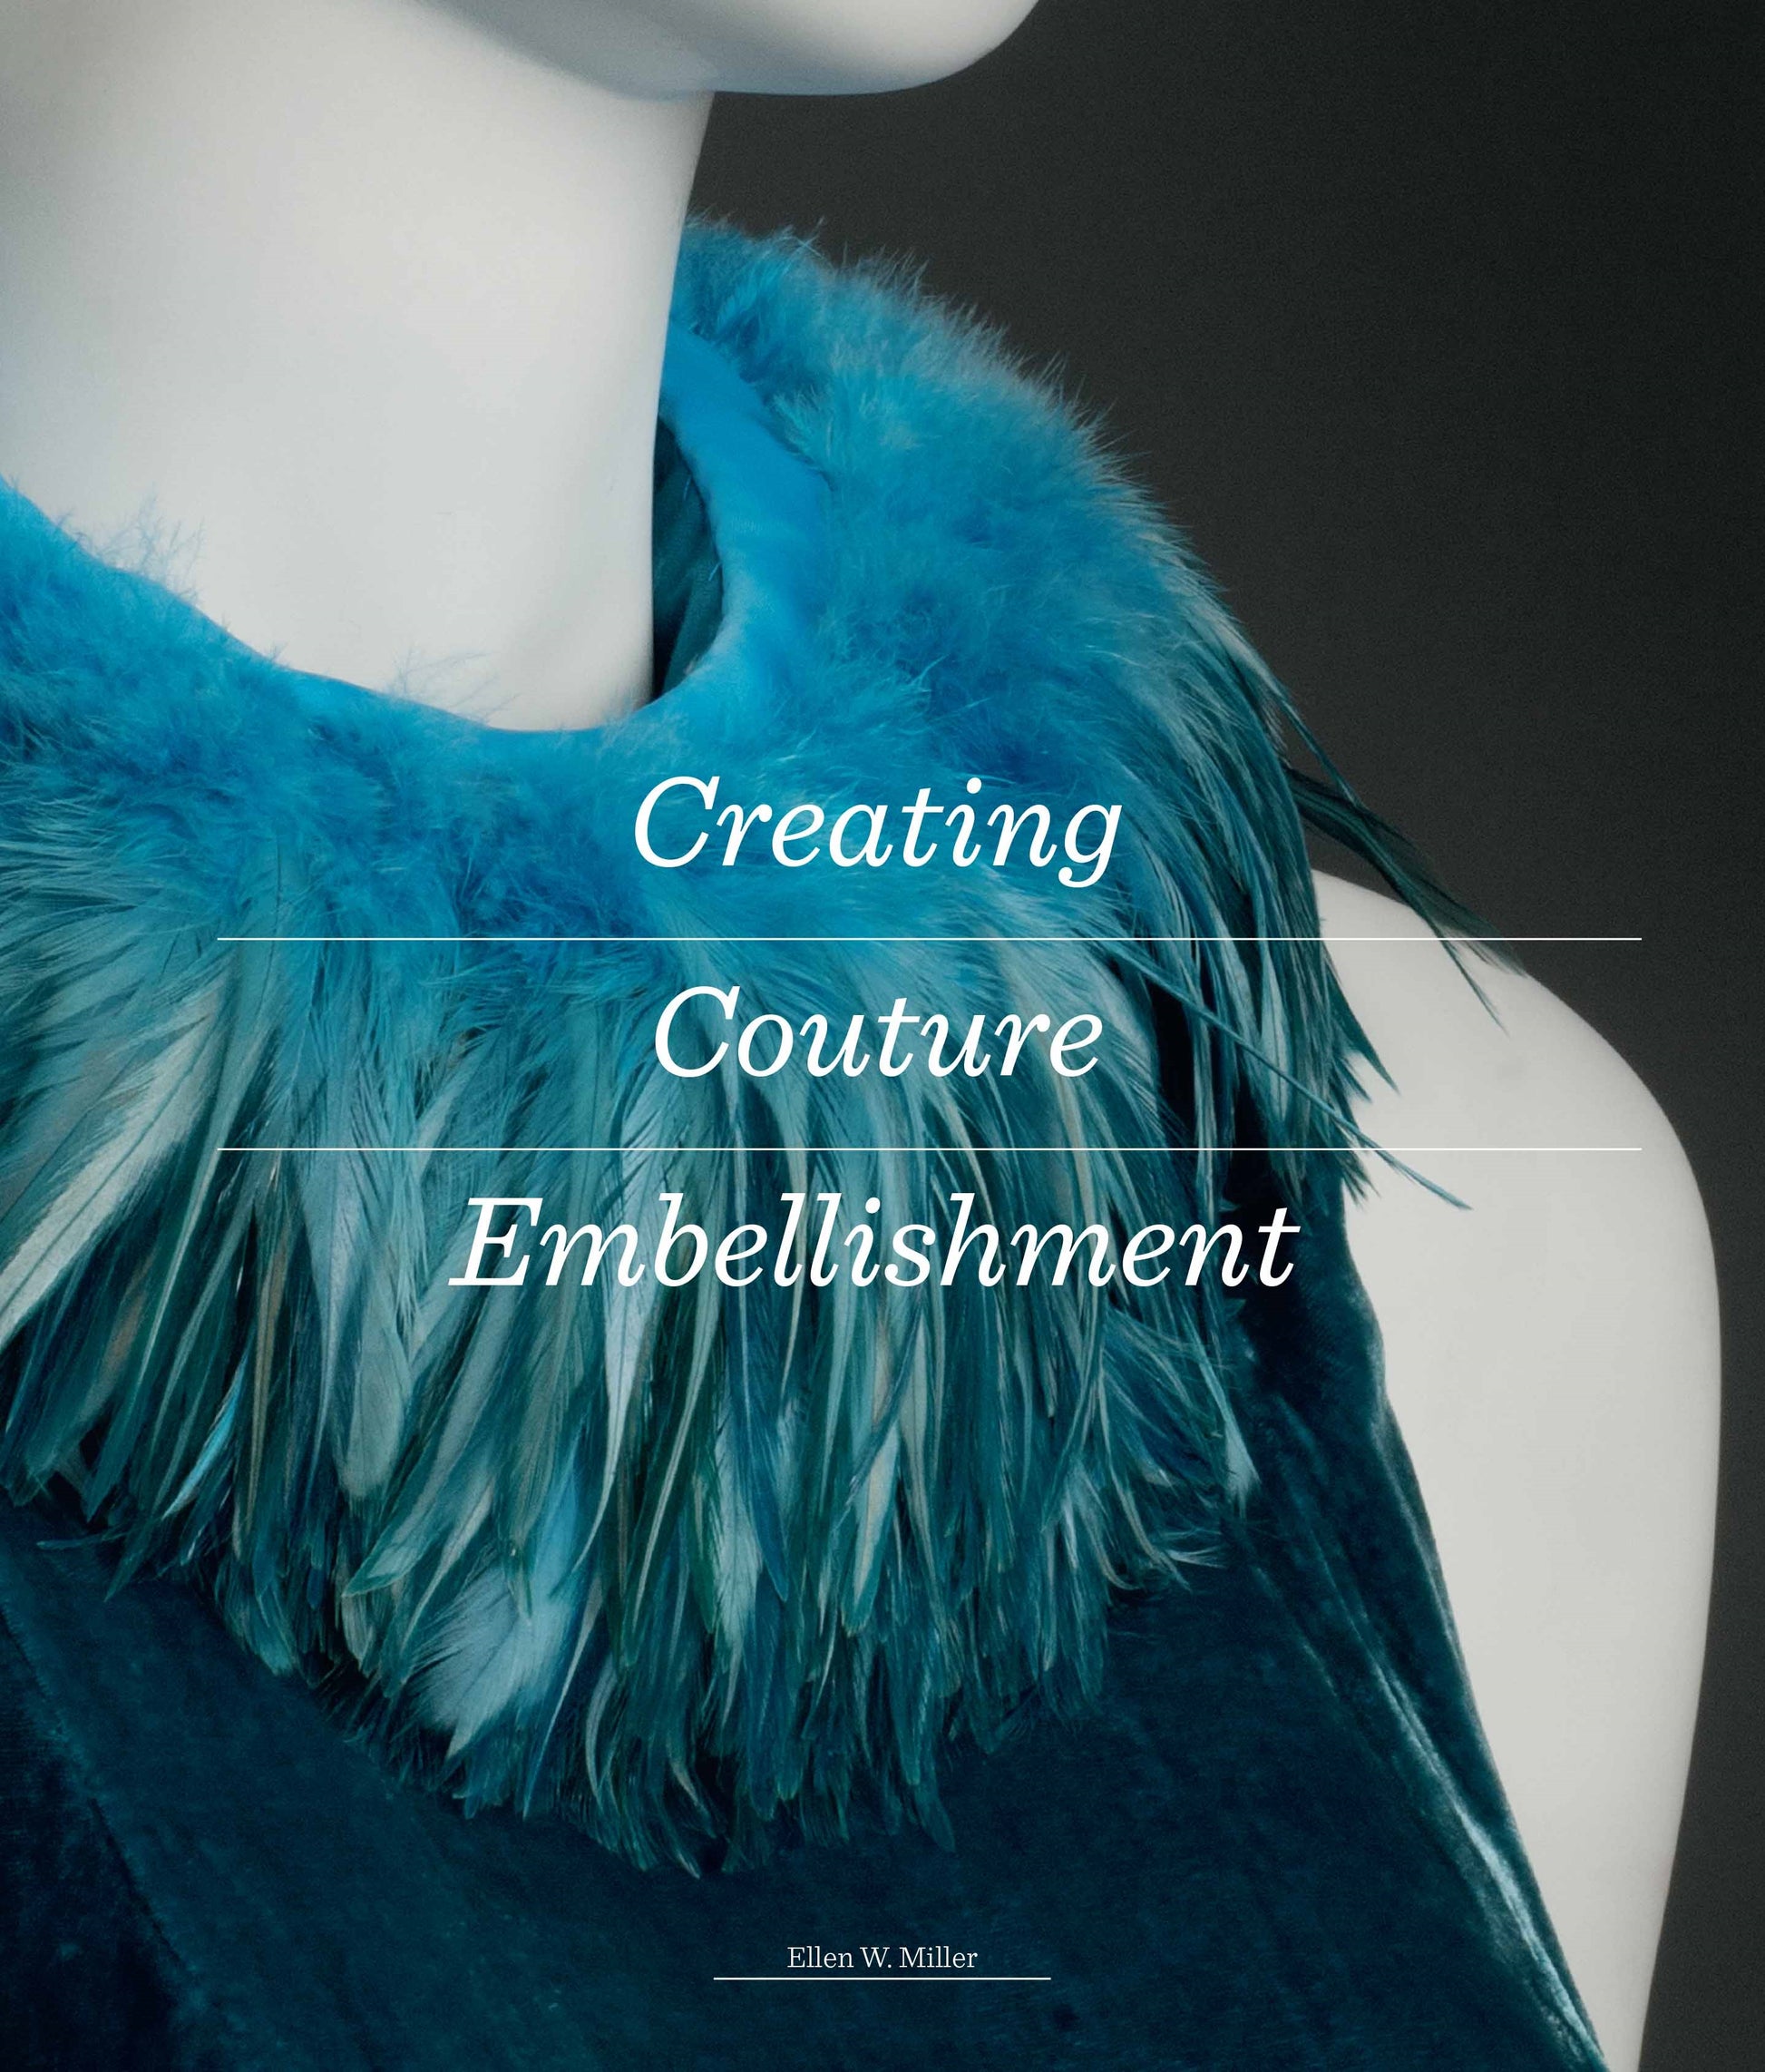 Creating Couture Embellishment by Ellen Miller